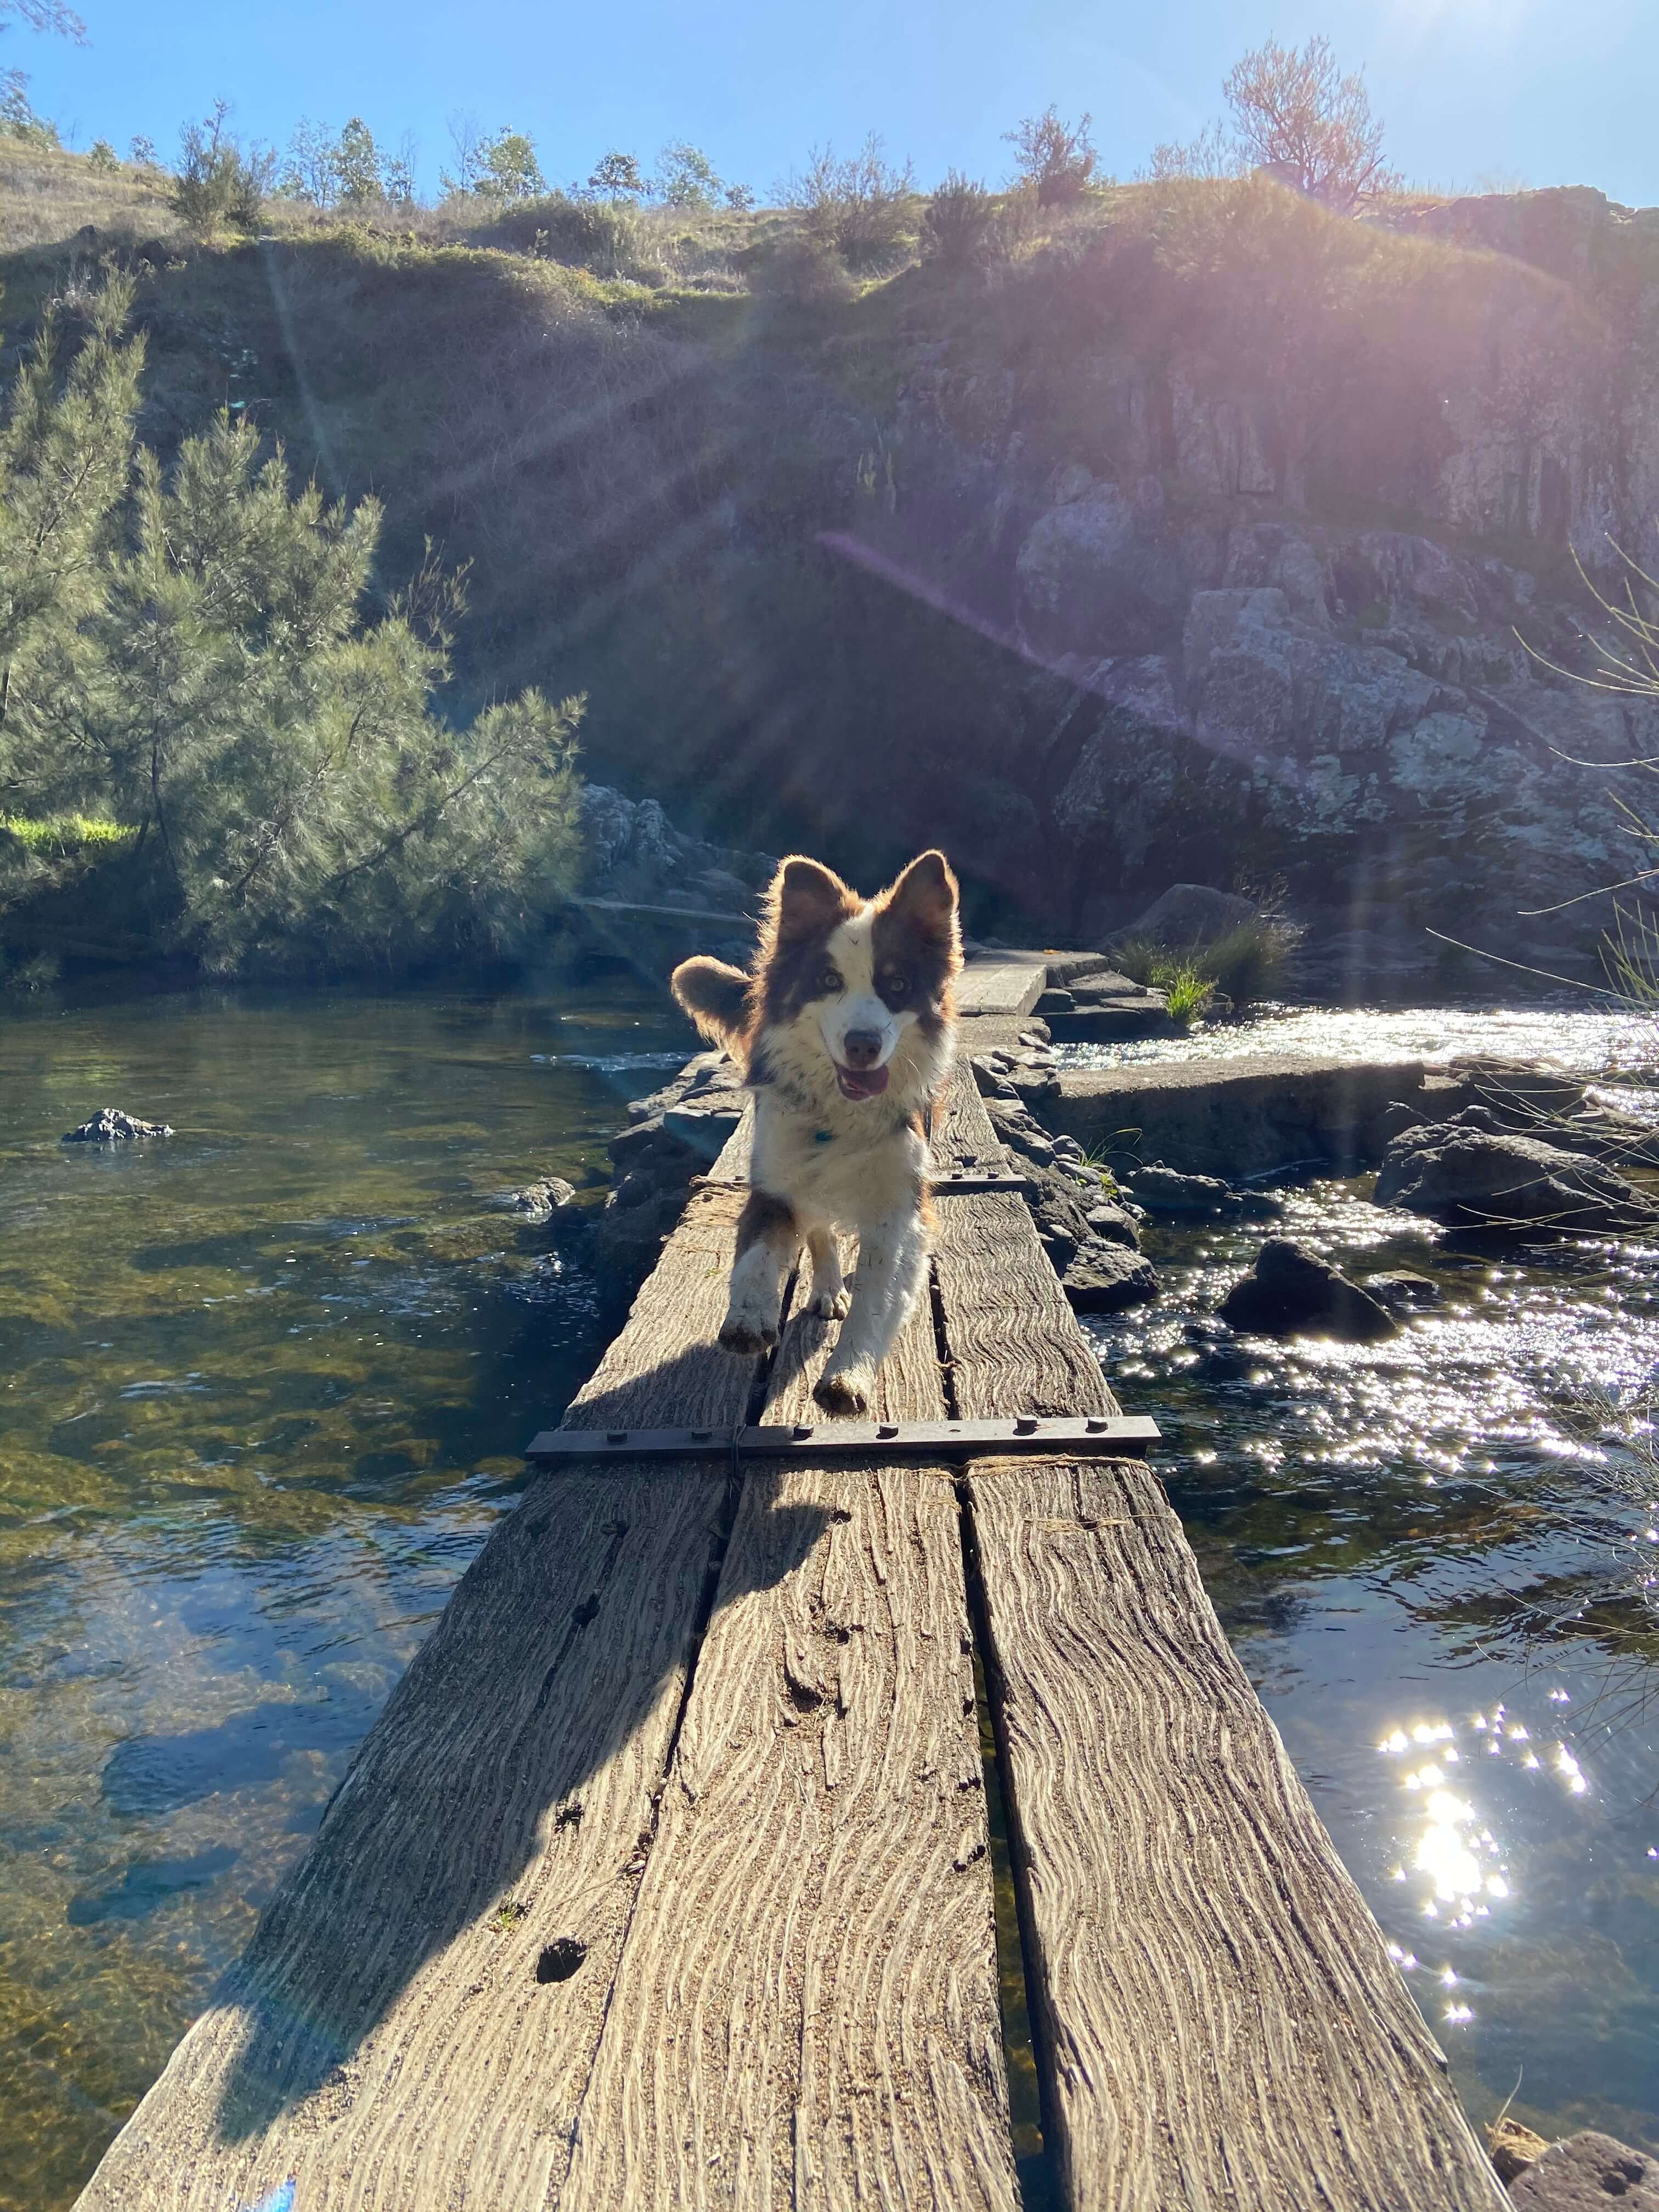 4-paw drive engaged for this river crossing